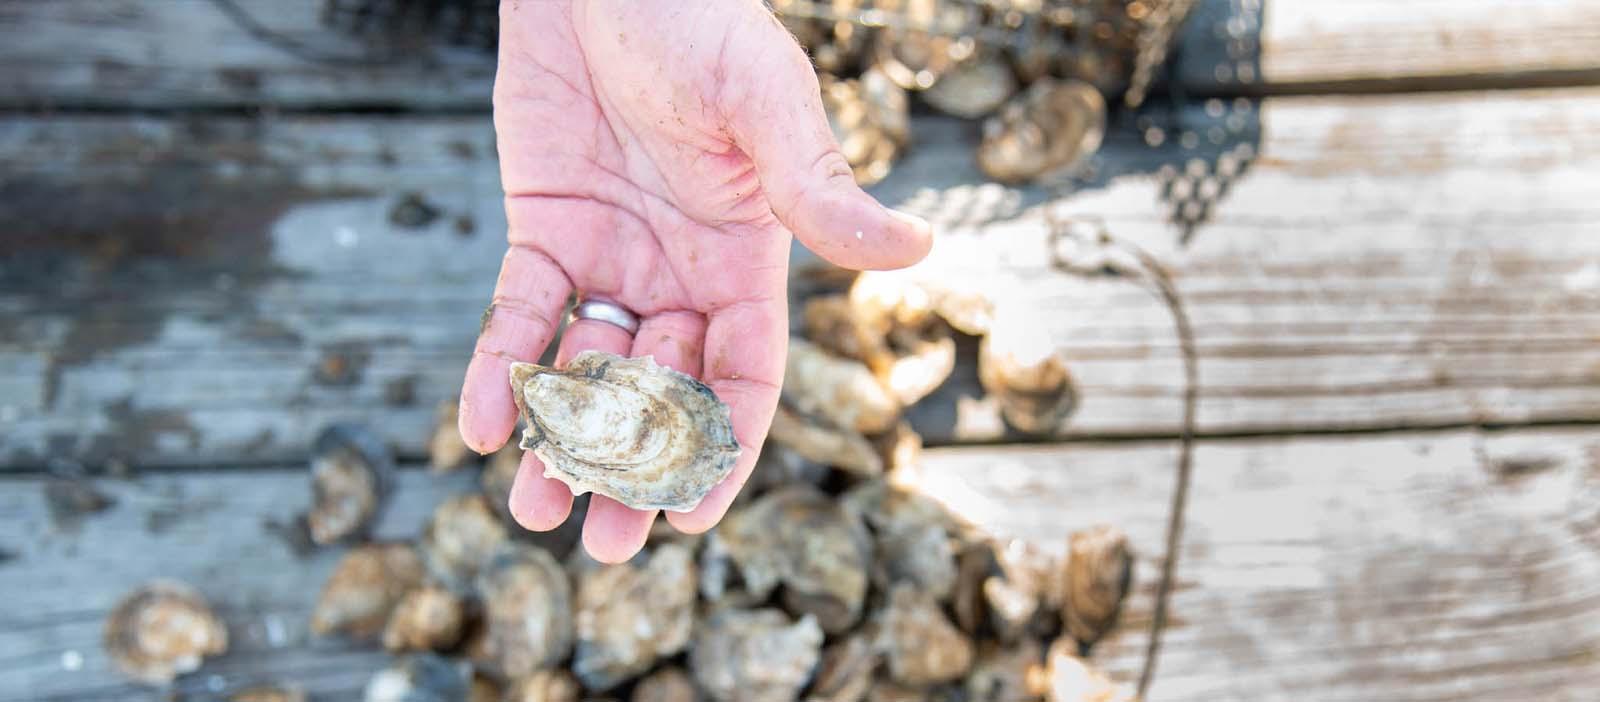 Shellfish Research Lab helps Georgia make strides in oyster aquaculture 